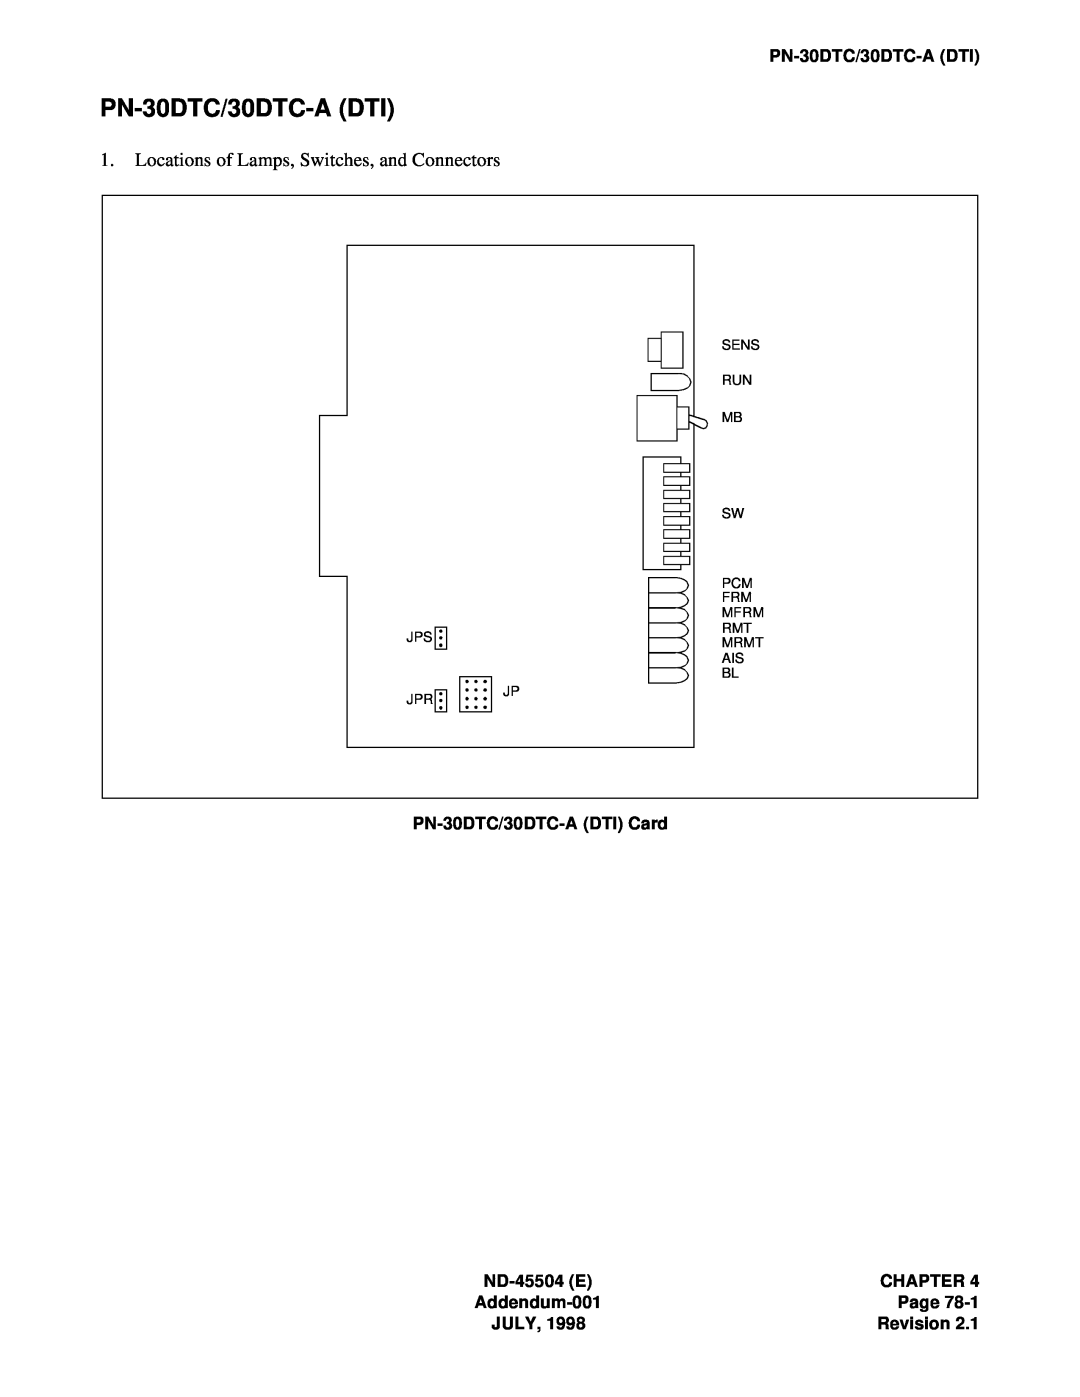 NEC 2000 IVS Locations of Lamps, Switches, and Connectors, PN-30DTC/30DTC-ADTI Card, ND-45504E, Chapter, Addendum-001 